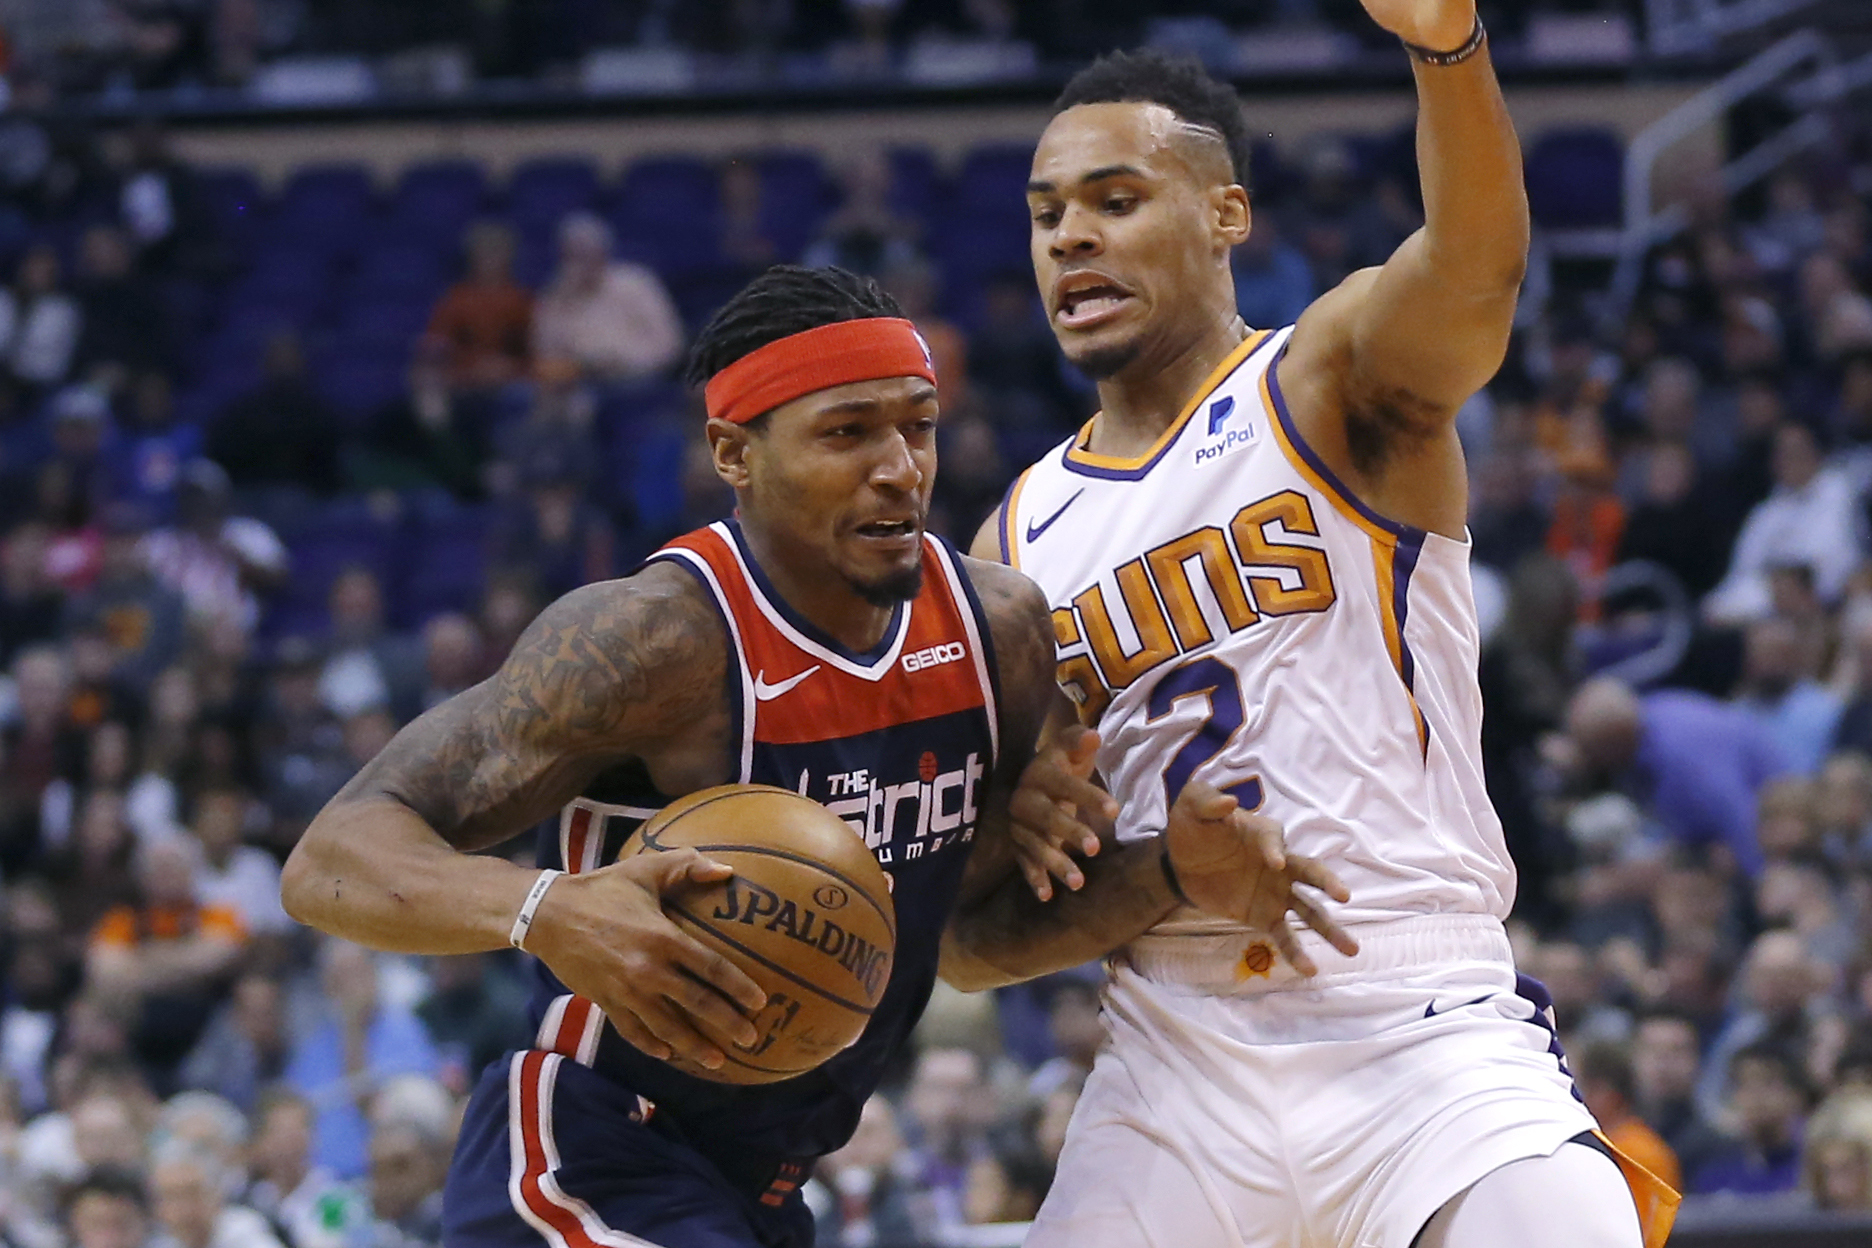 Beal scores 35 points, Wizards top Suns 140-132